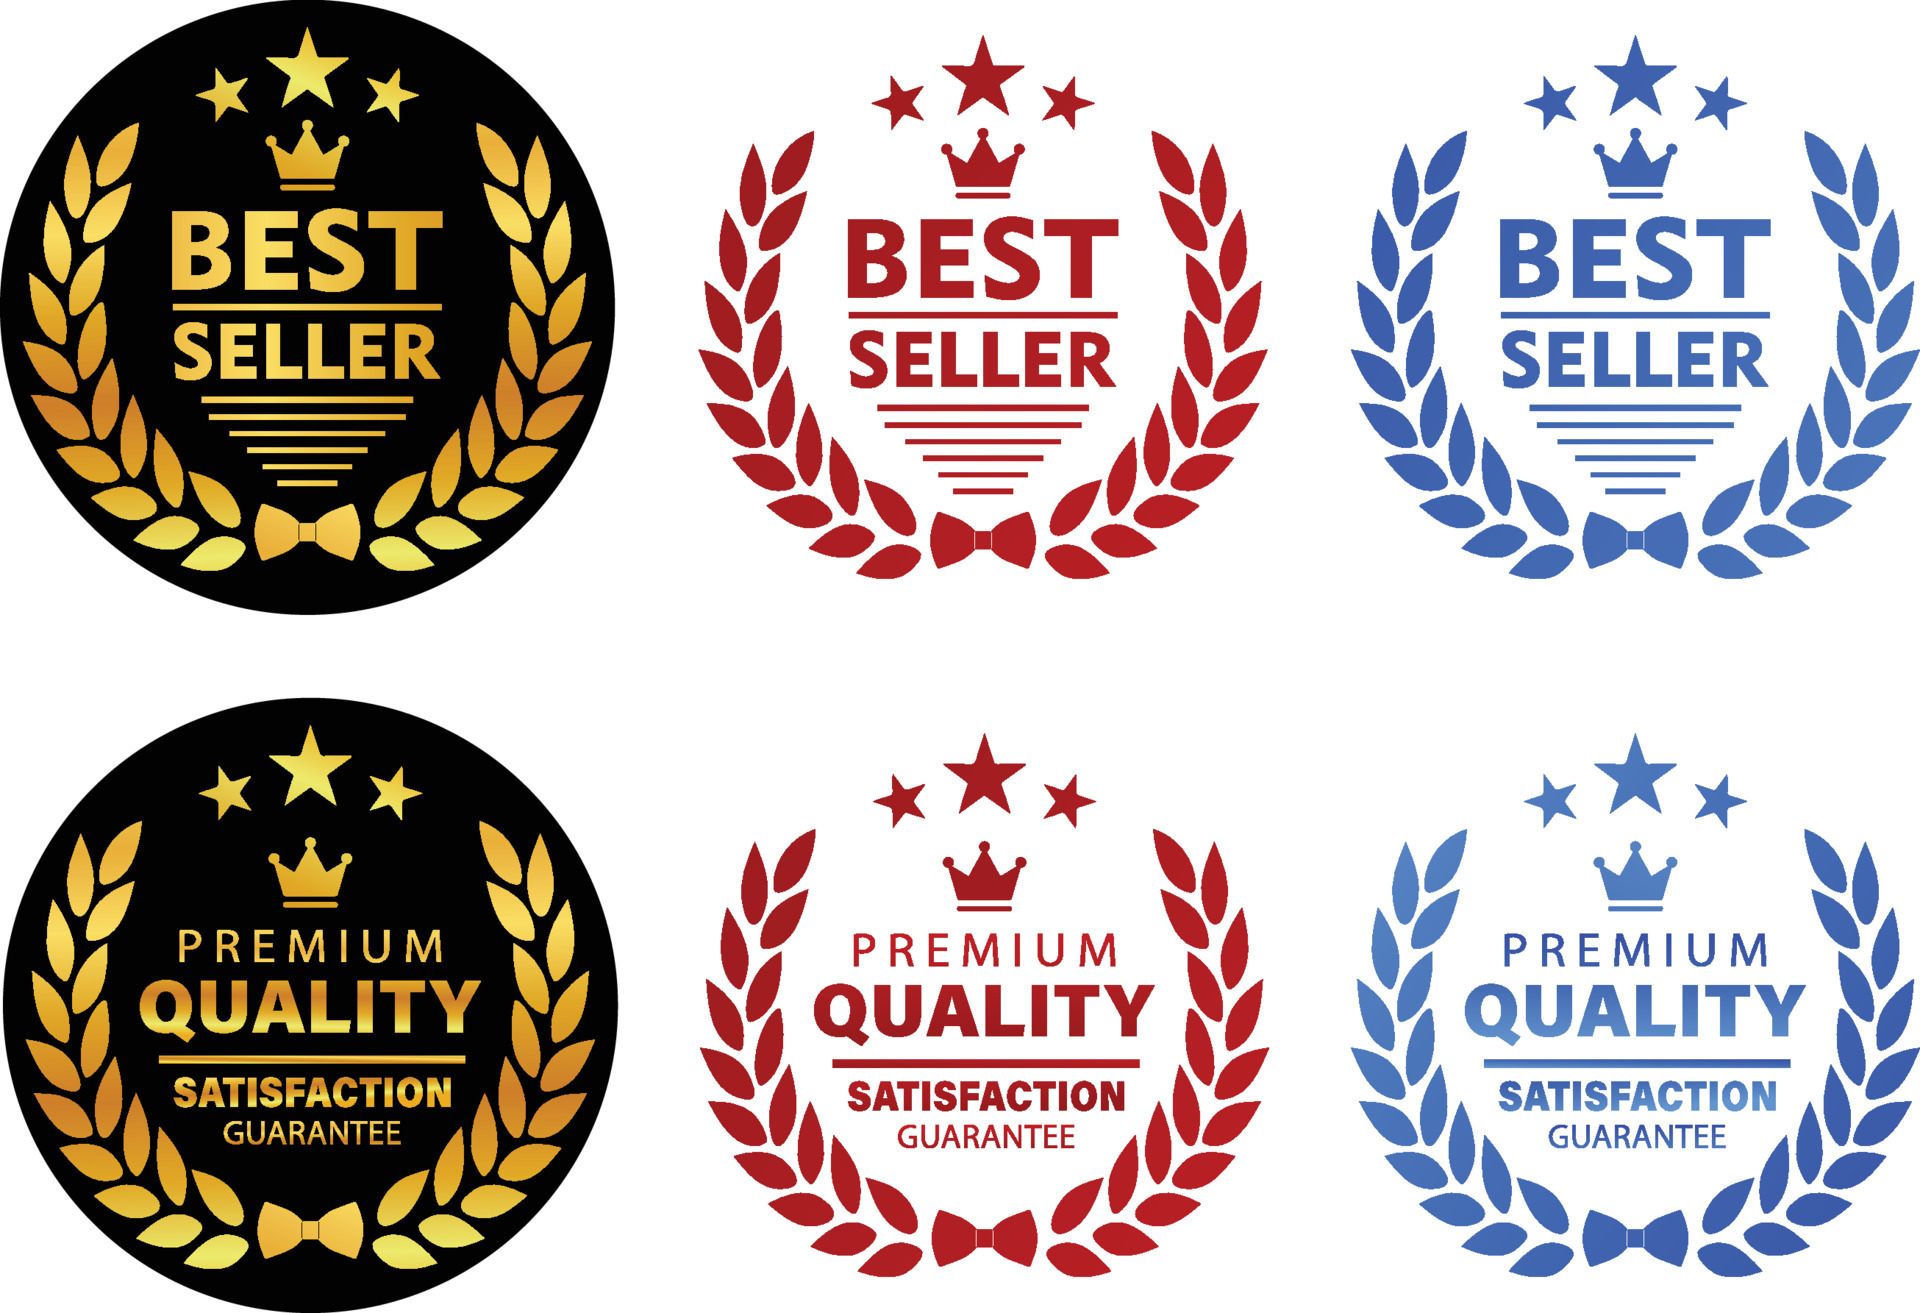 https://static.vecteezy.com/system/resources/previews/021/552/409/original/set-of-best-seller-and-satisfaction-guarantee-label-in-various-colors-such-as-gold-red-and-blue-illustration-for-business-purpose-promotion-advertisement-etc-vector.jpg